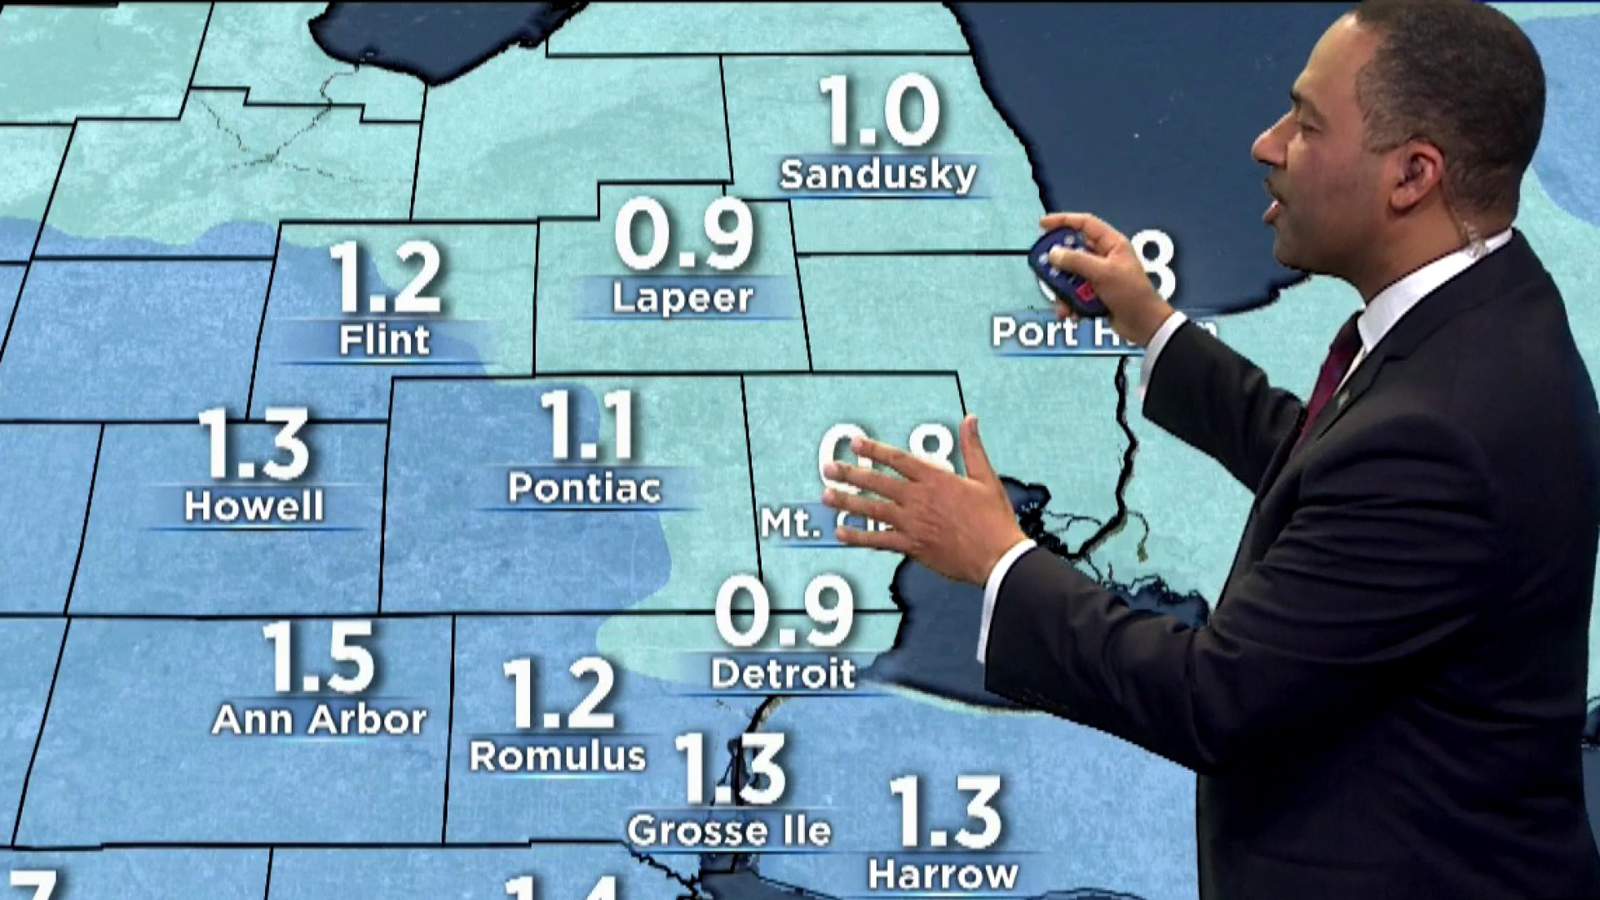 Metro Detroit weather: Chilly Sunday afternoon, snow and rain arrive tonight, March 22, 2020, 8 p.m. update